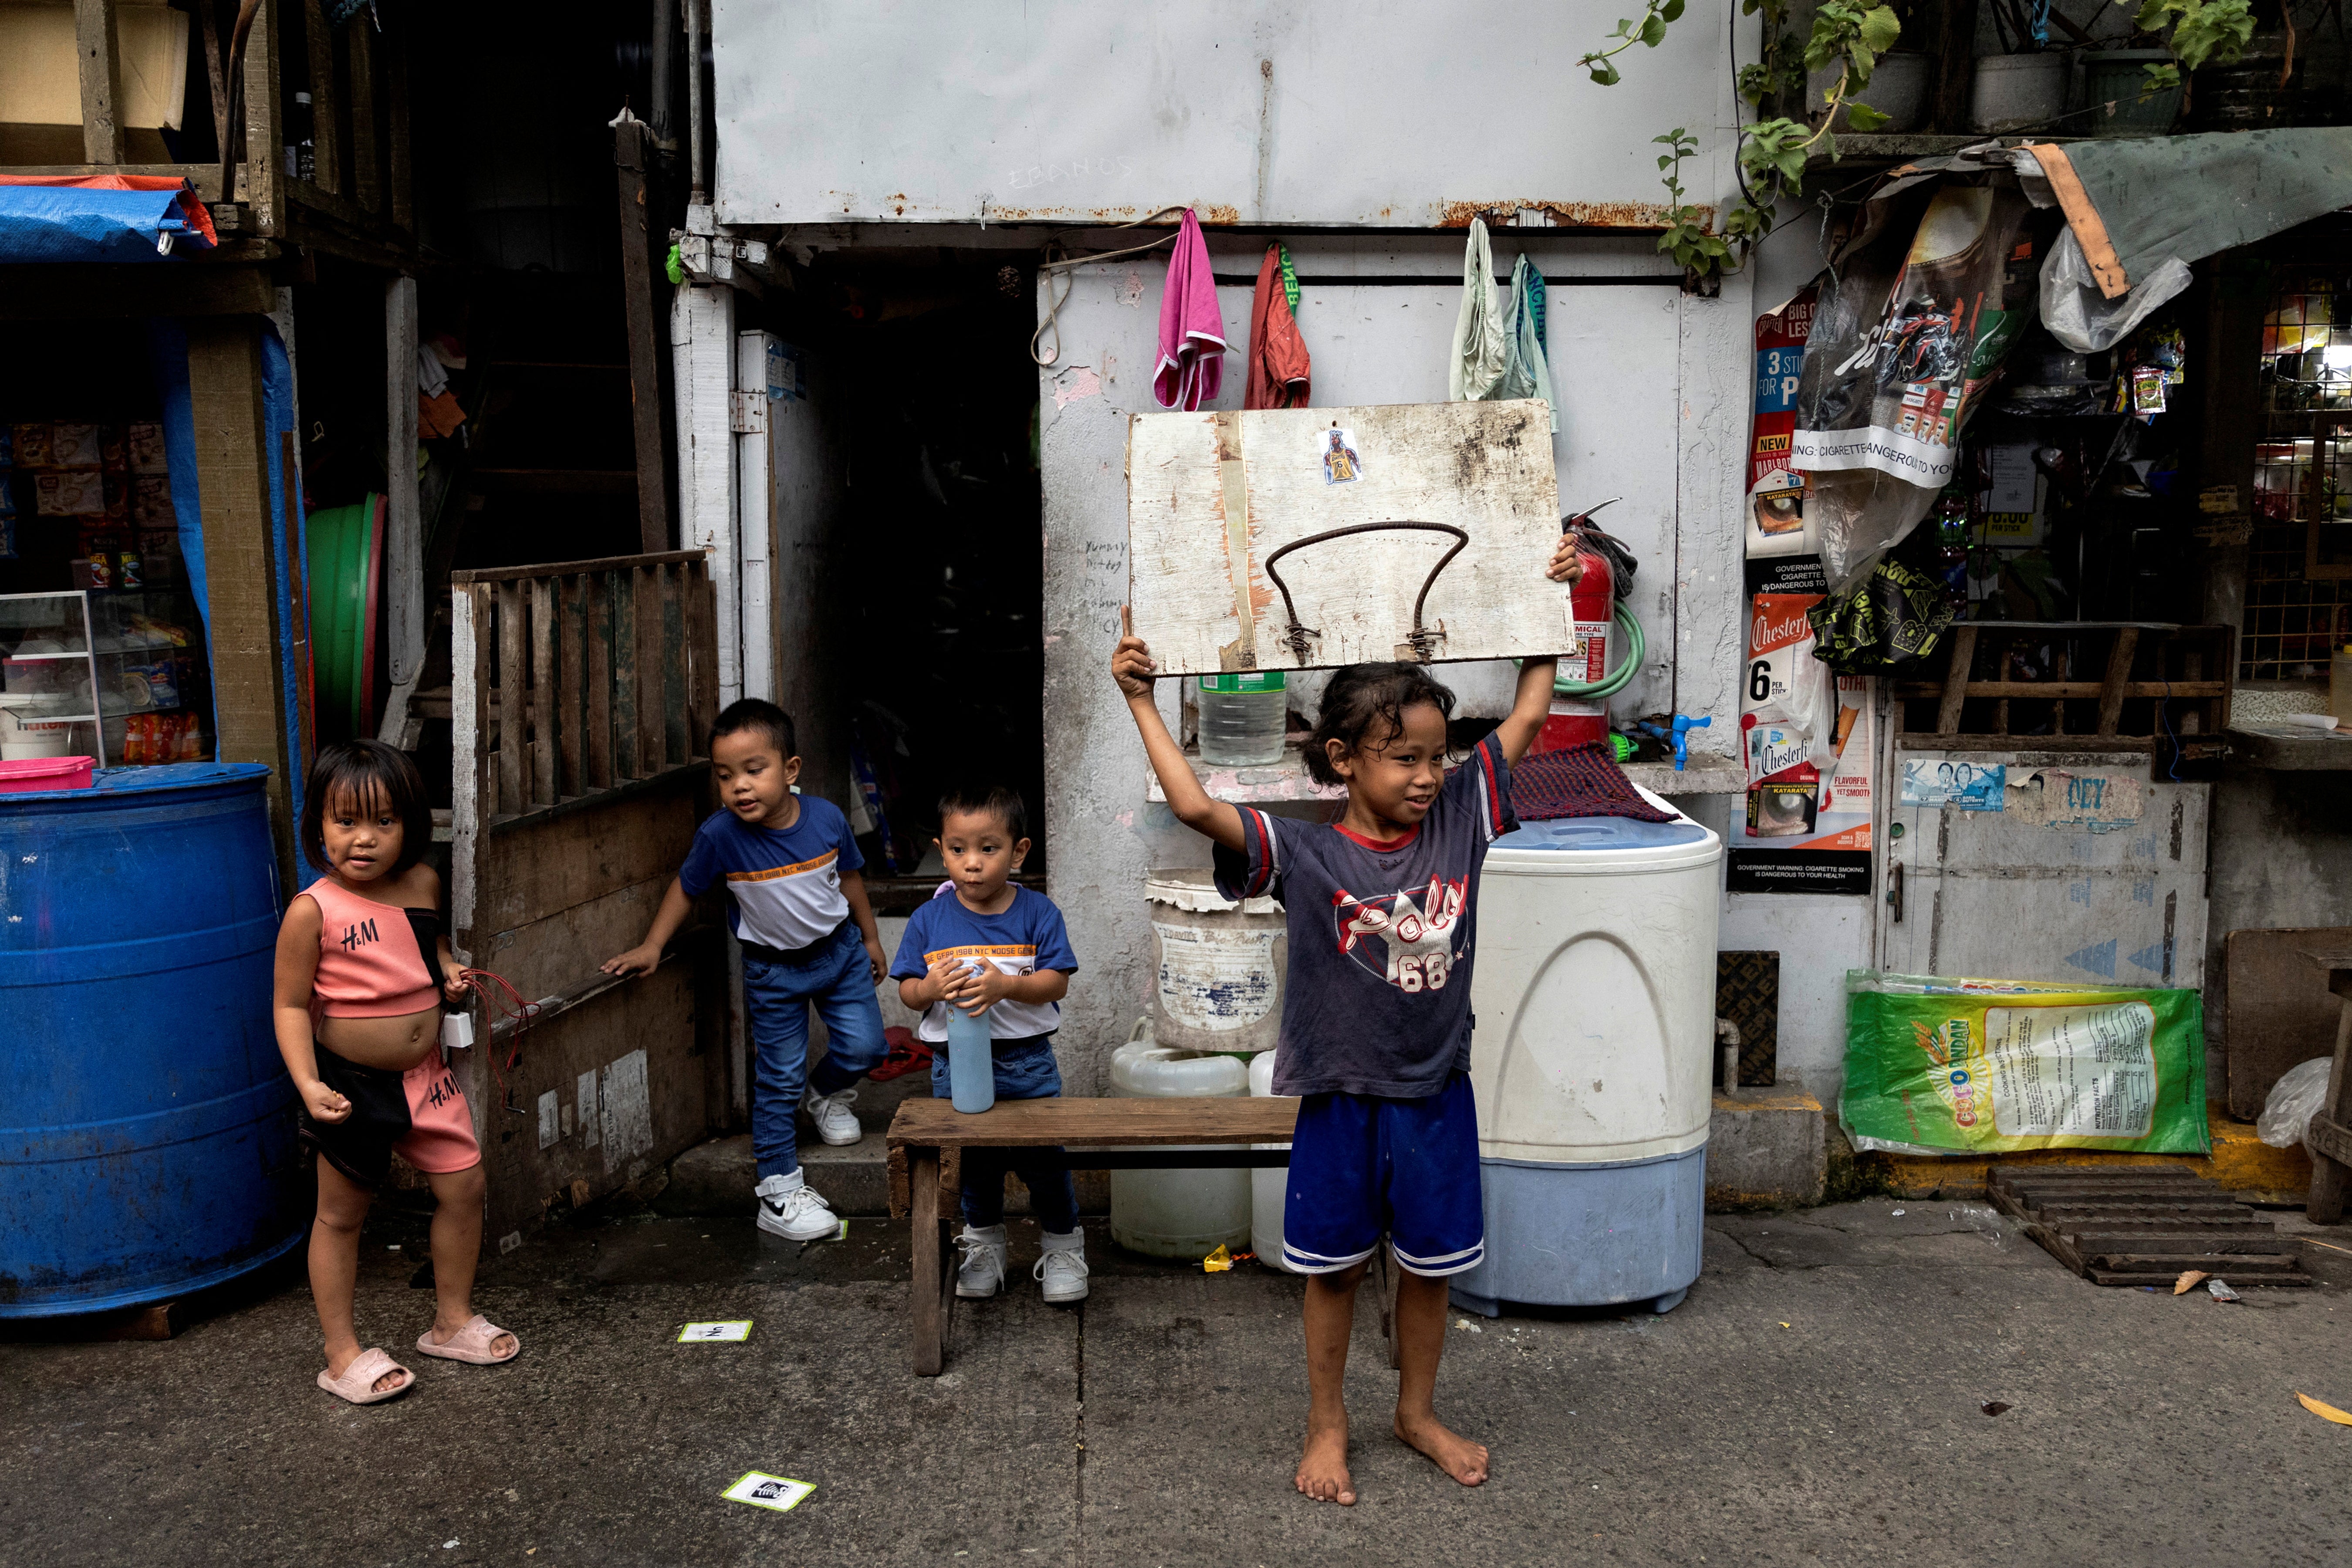 A boy carries a makeshift basketball rim while playing with friends in Manila